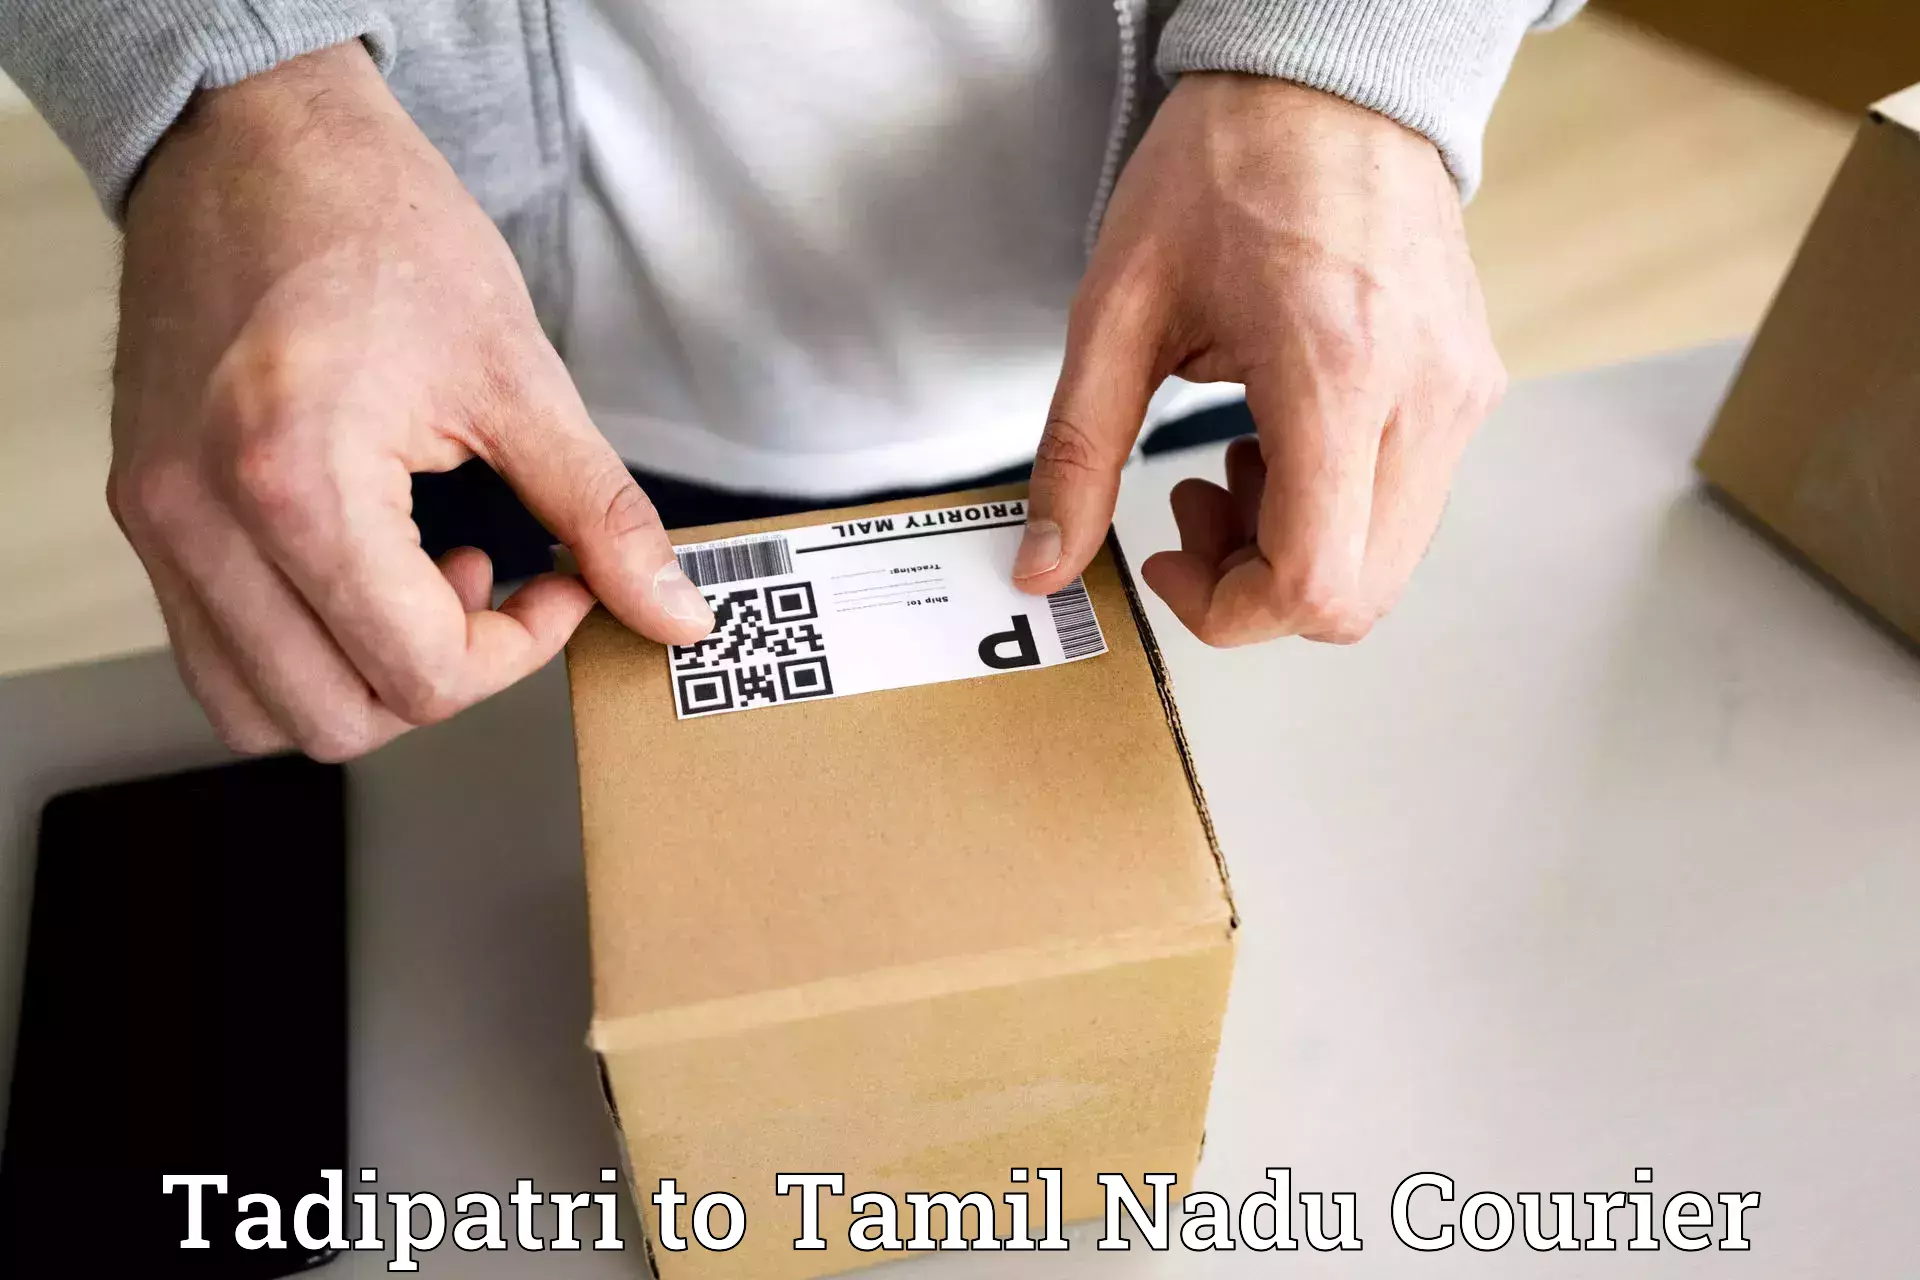 Express package handling Tadipatri to Trichy